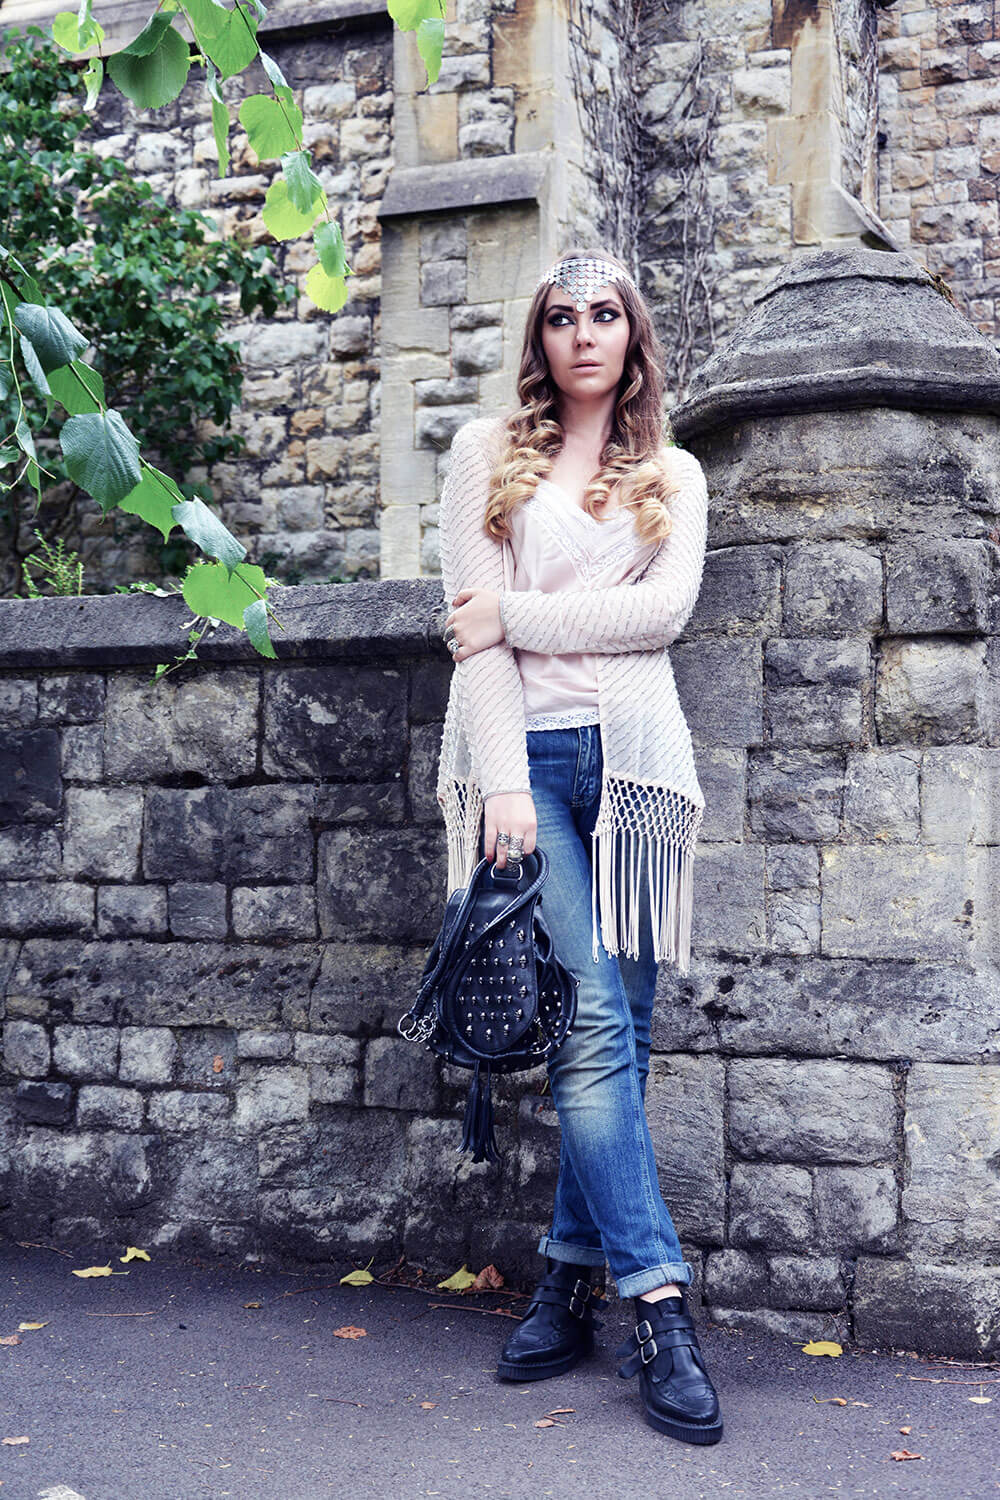 Edita in New Look, Dior top, Asos jeans and headpiece, Underground shoes